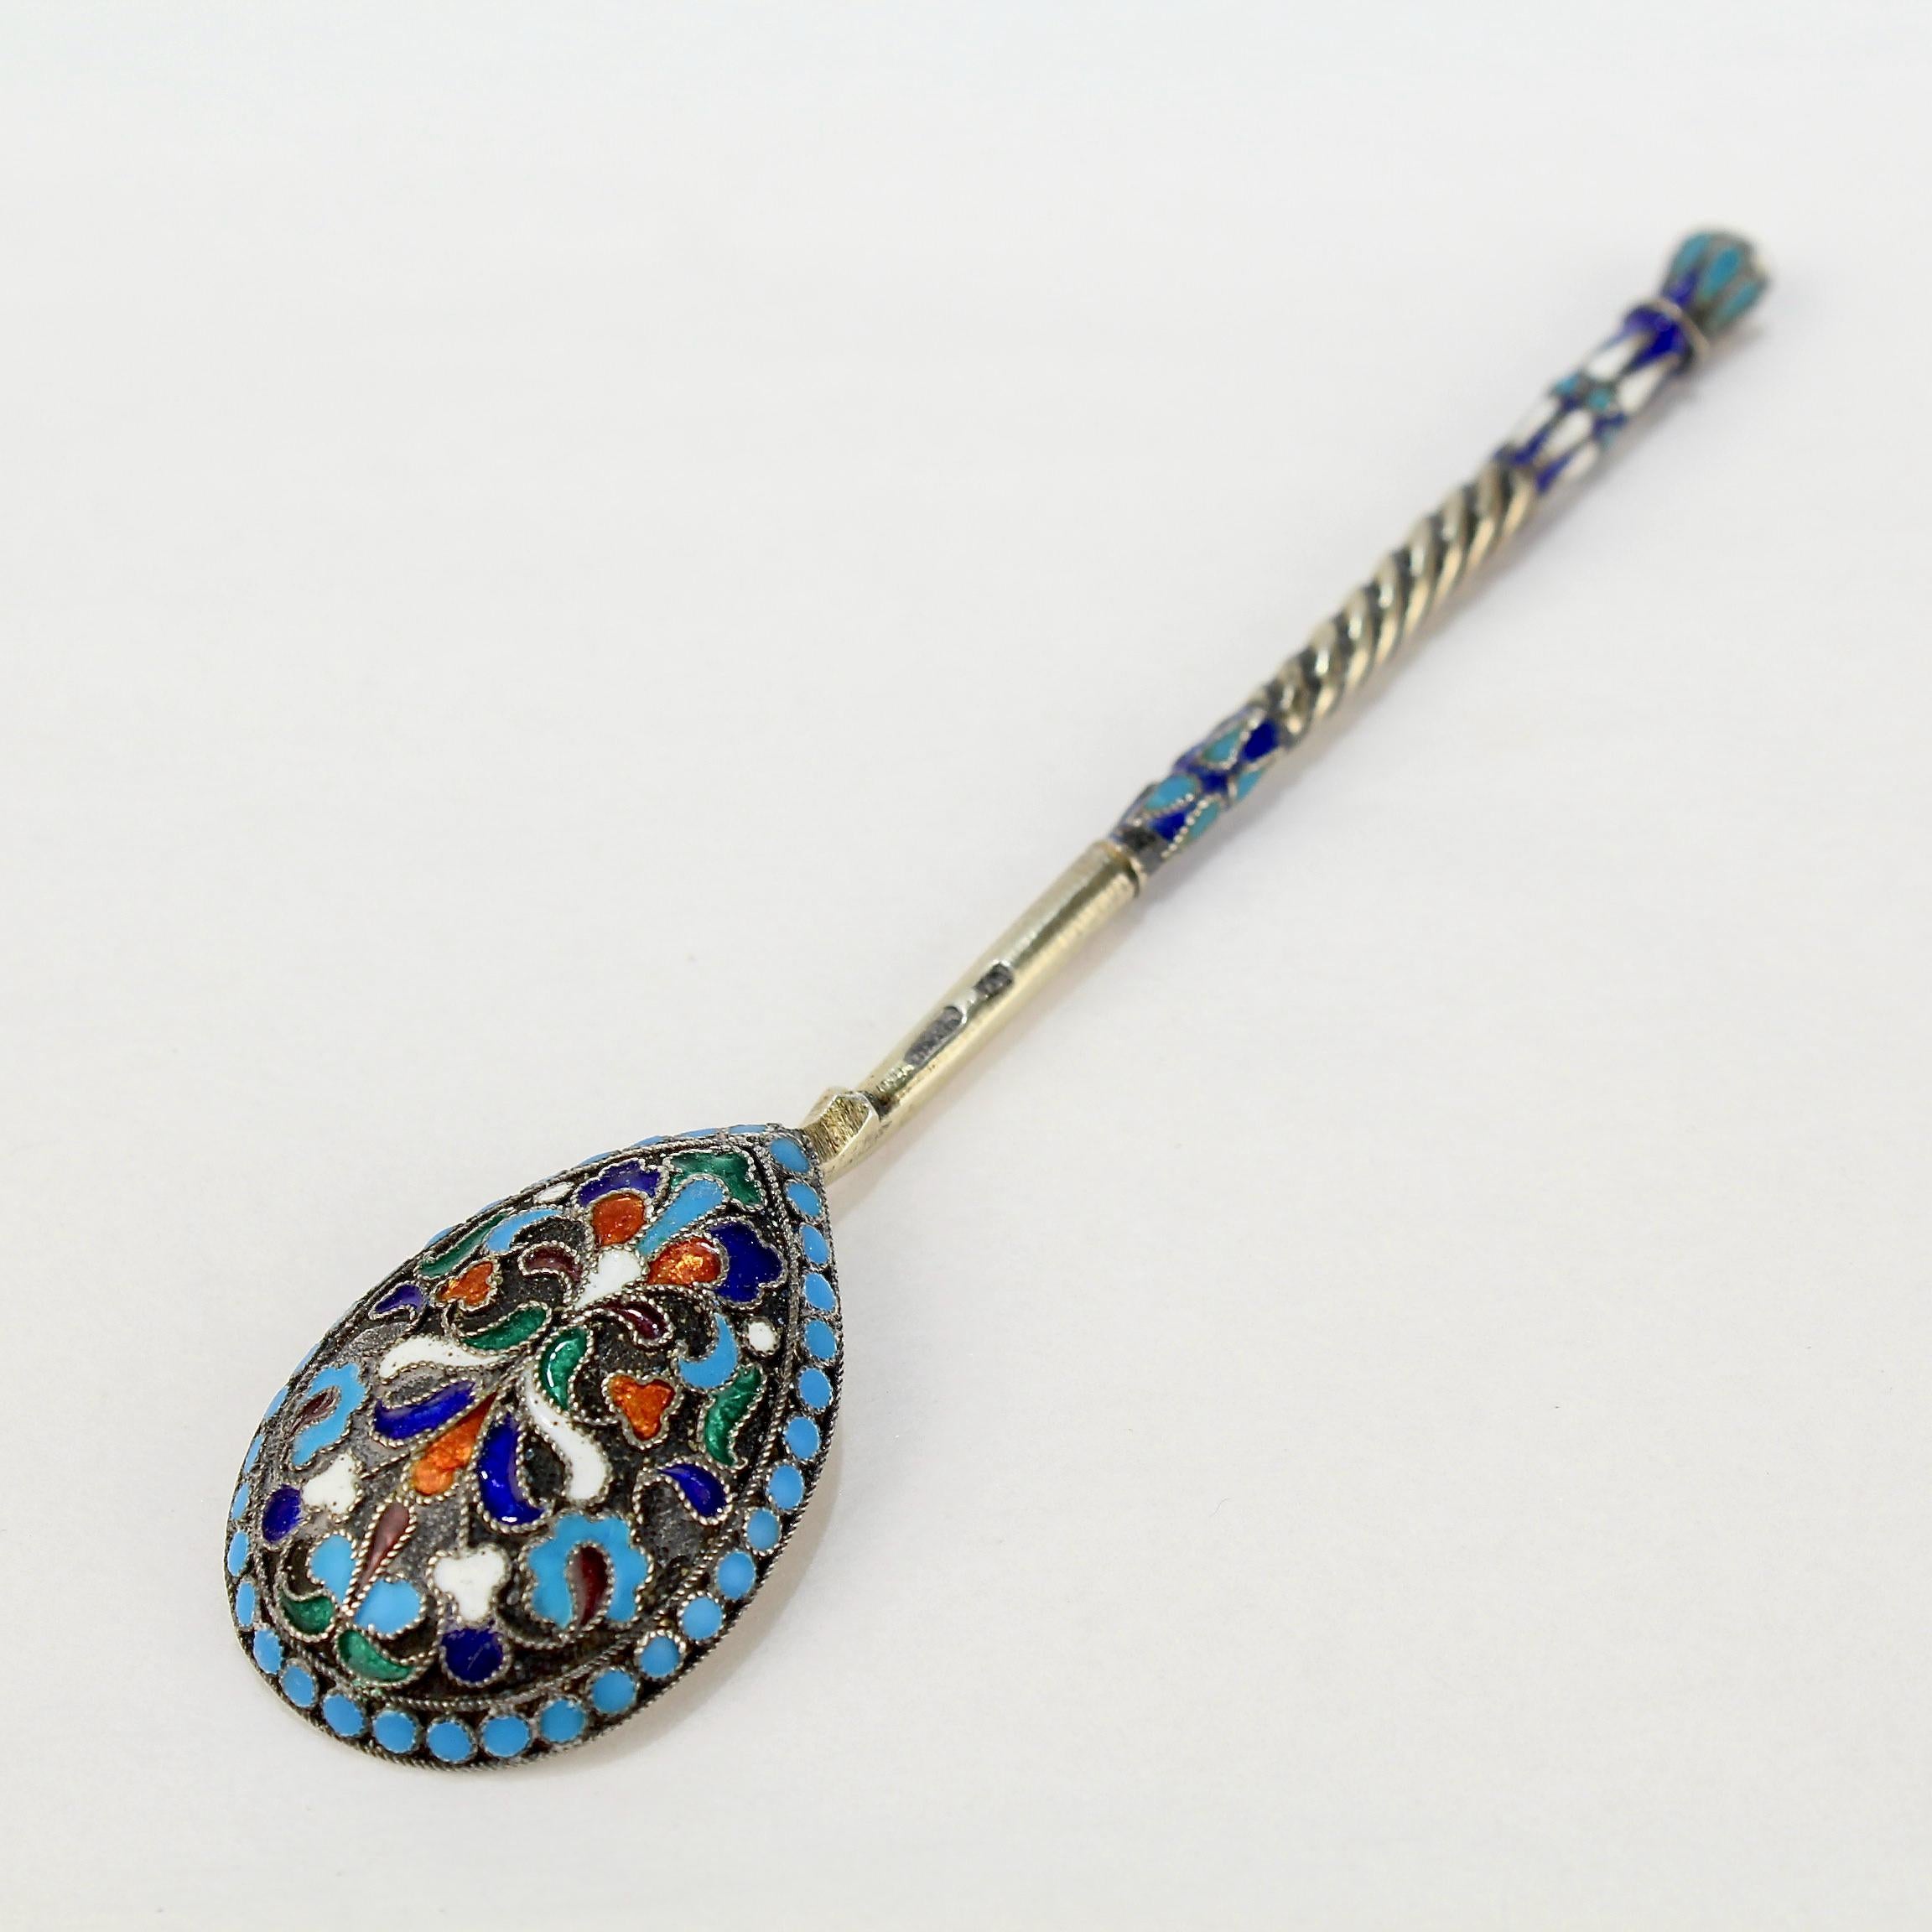 A very fine antique Russian tea or kvosh spoon.

With polychrome cloisonné enamel decoration to both the front and reverse.

Simply a wonderful piece of Imperial Russian silver!

Date:
Late 19th or Early 20th Century

Overall Condition:
It is in